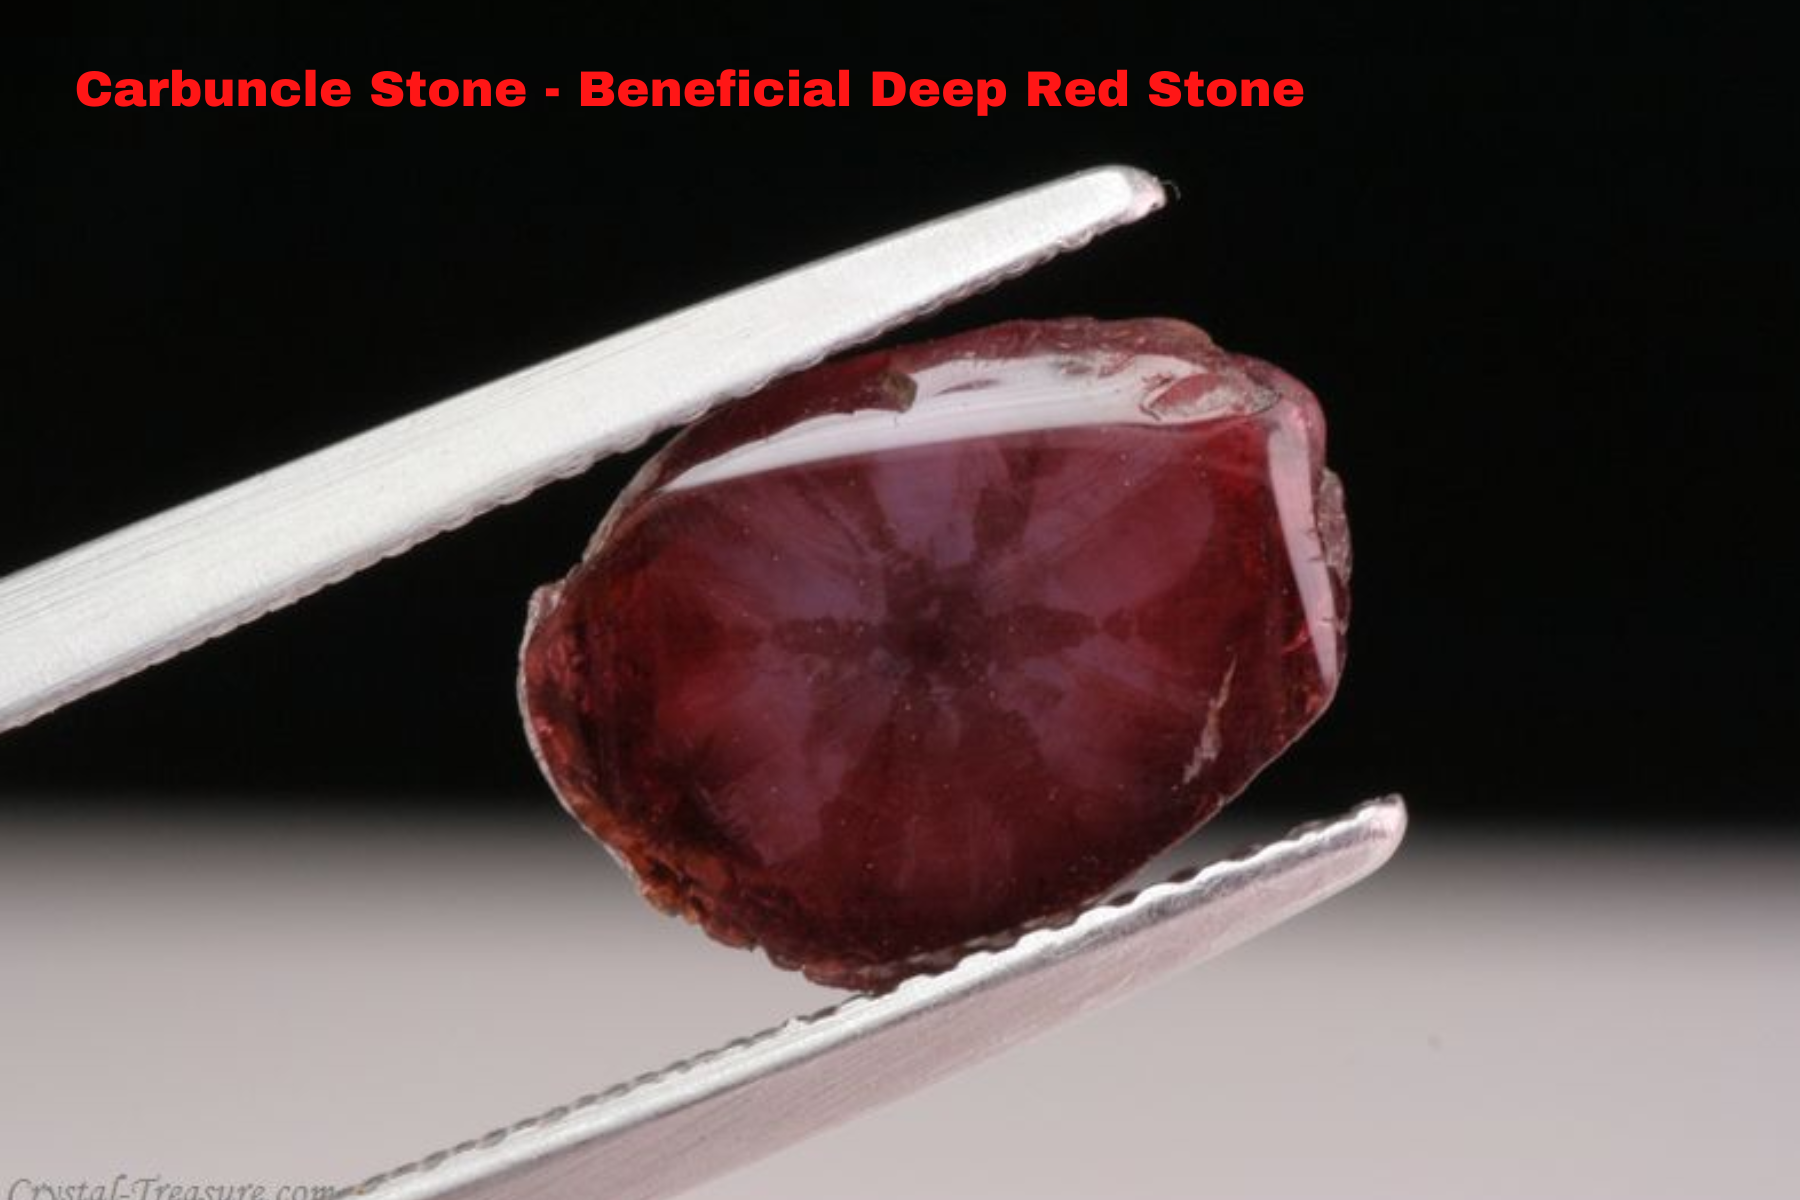 Carbuncle Stone - Beneficial Deep Red Stone